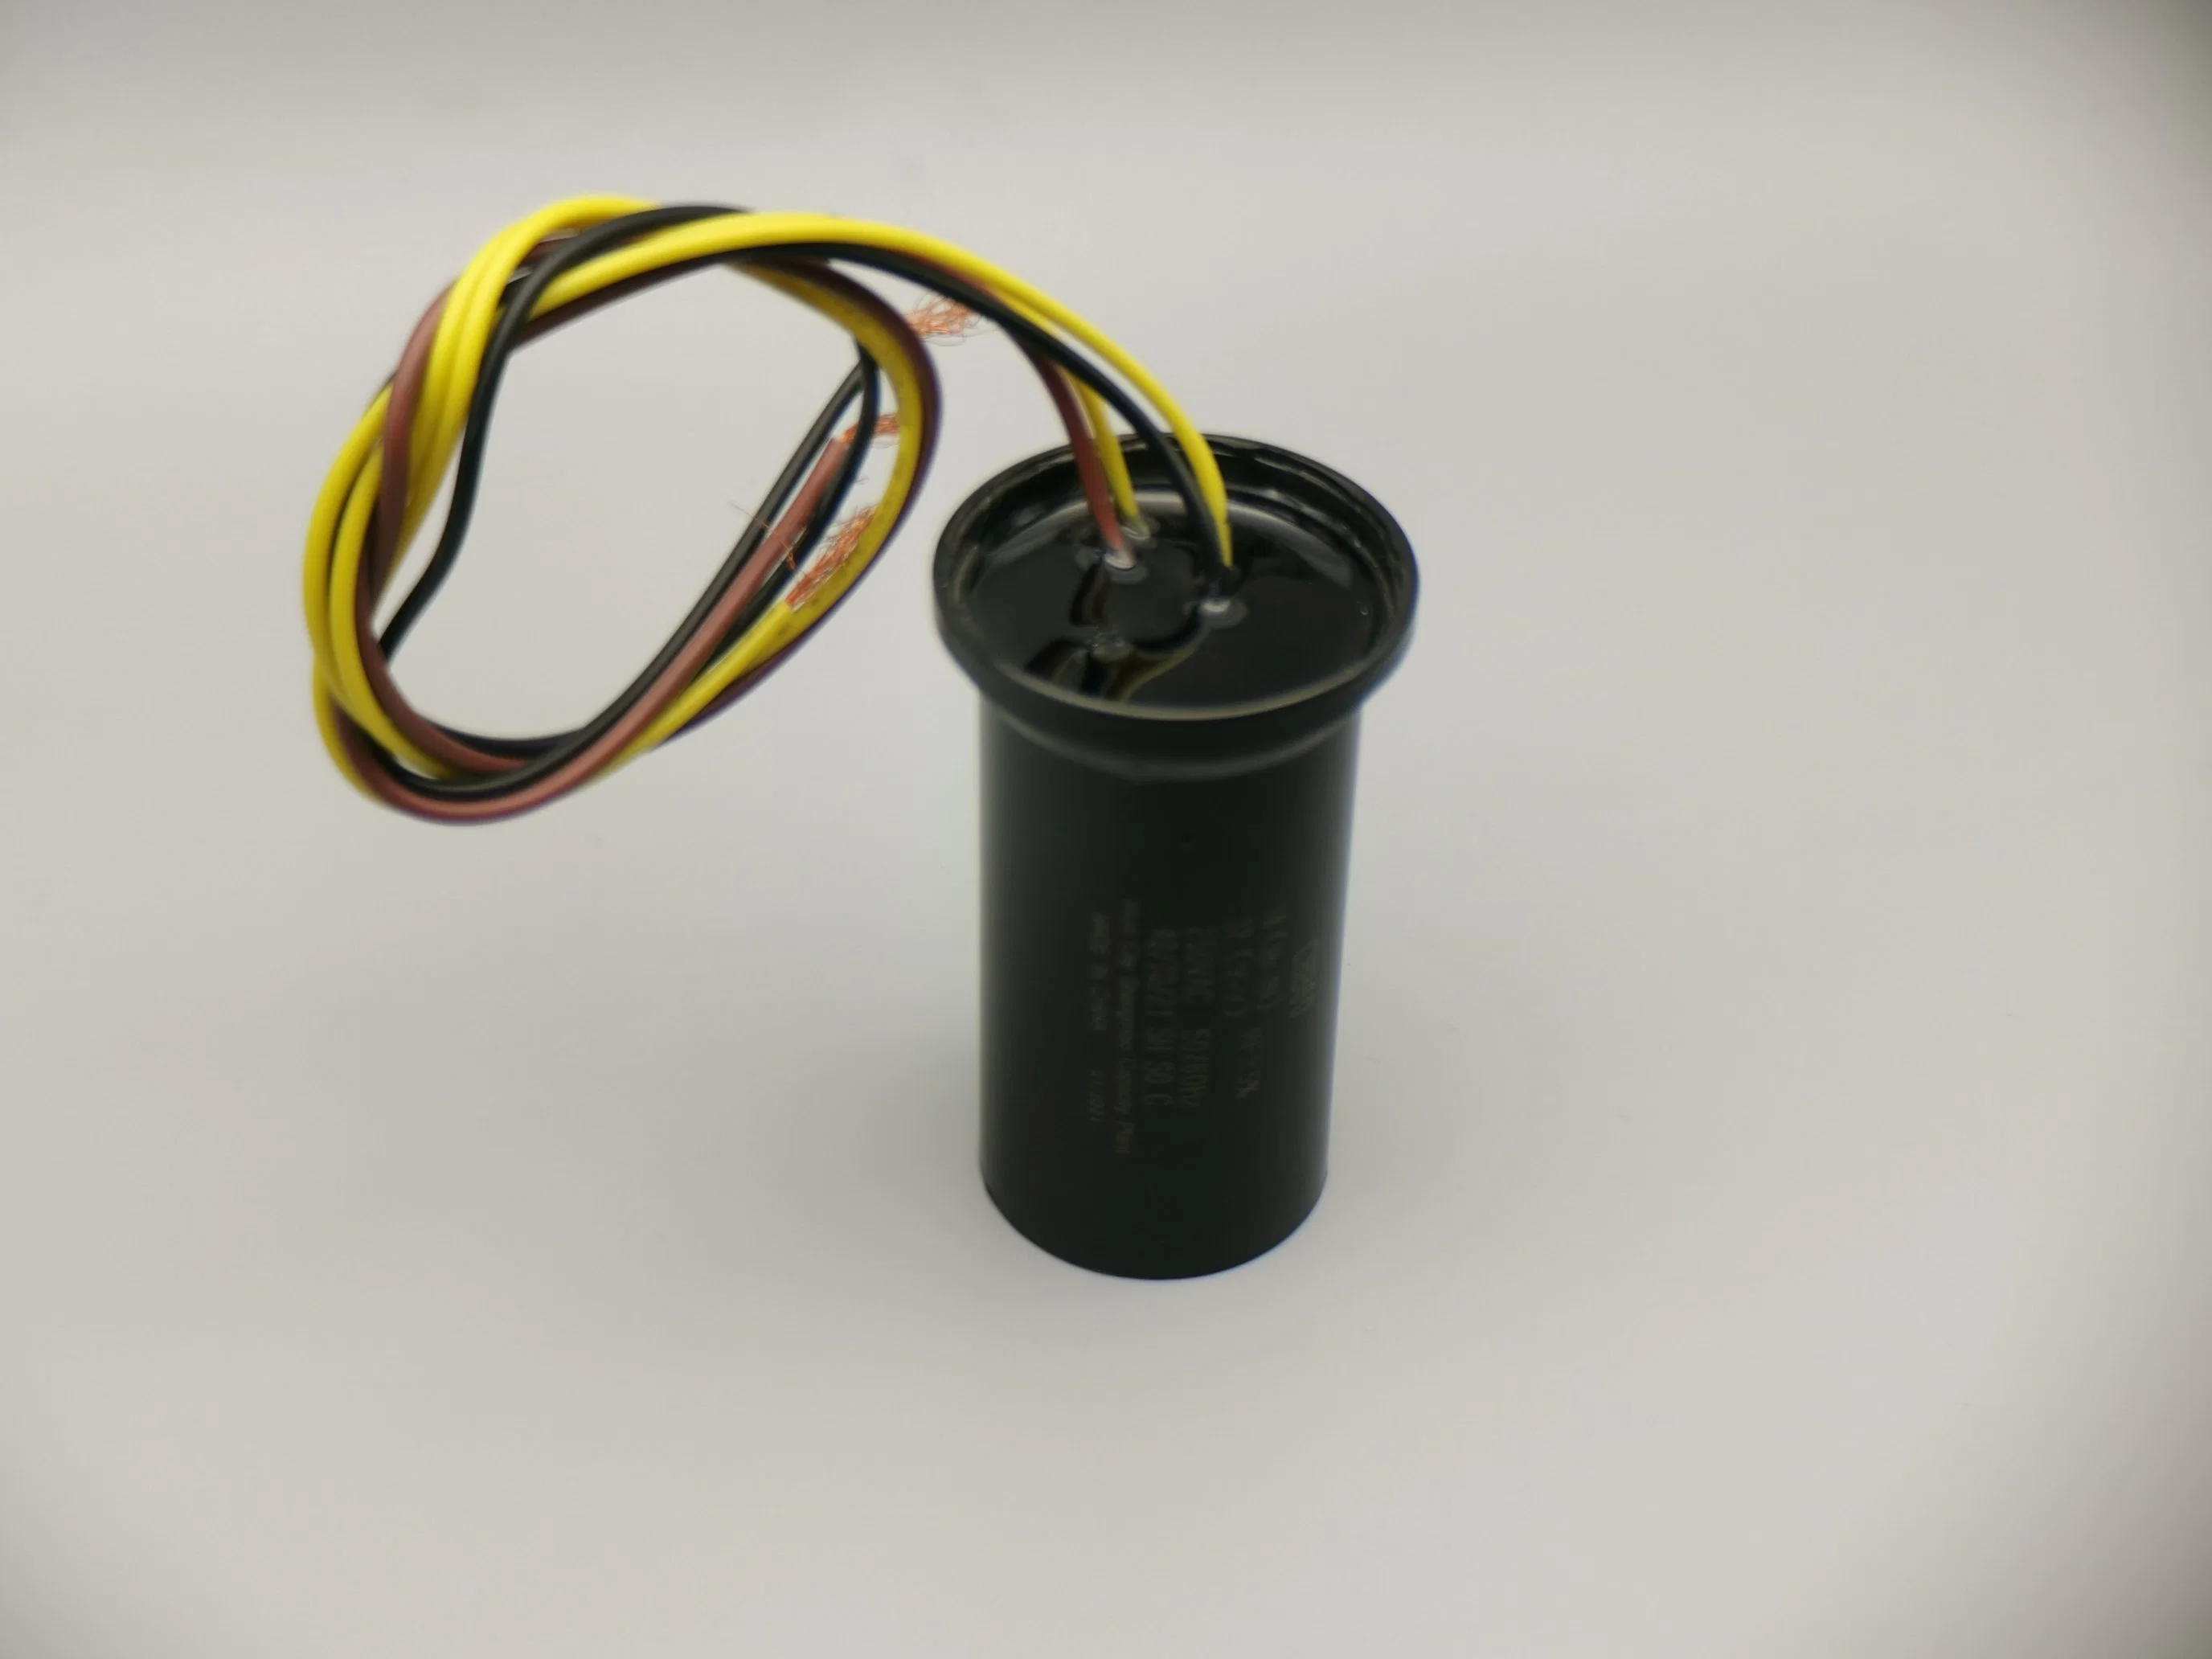 Motor Running Capacitor for Twin Tub Washing Machine, Household Appliance